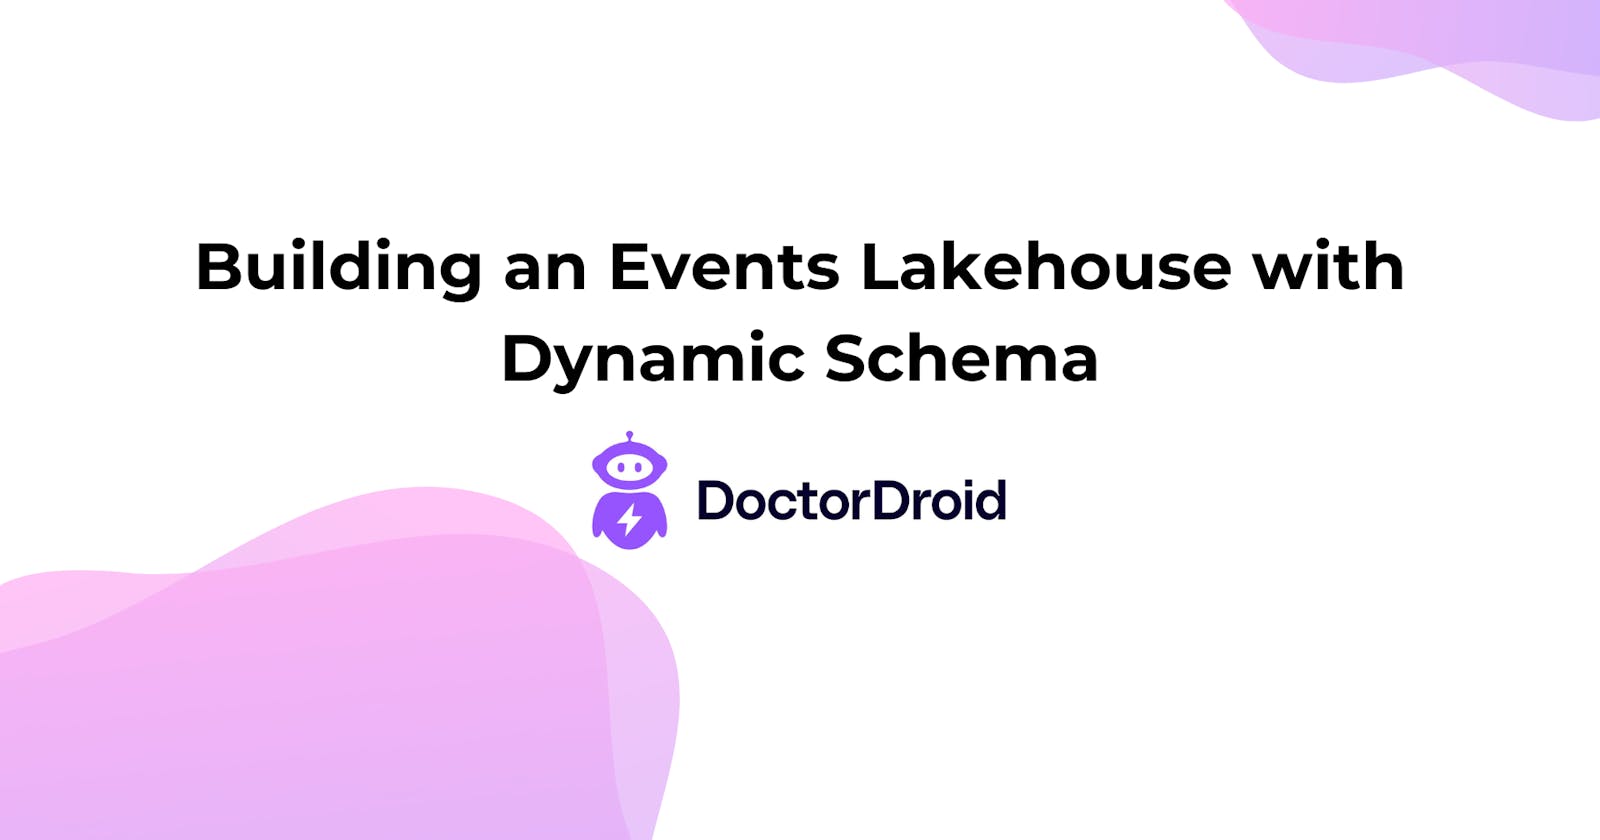 Building an Events Lakehouse with Dynamic Schema